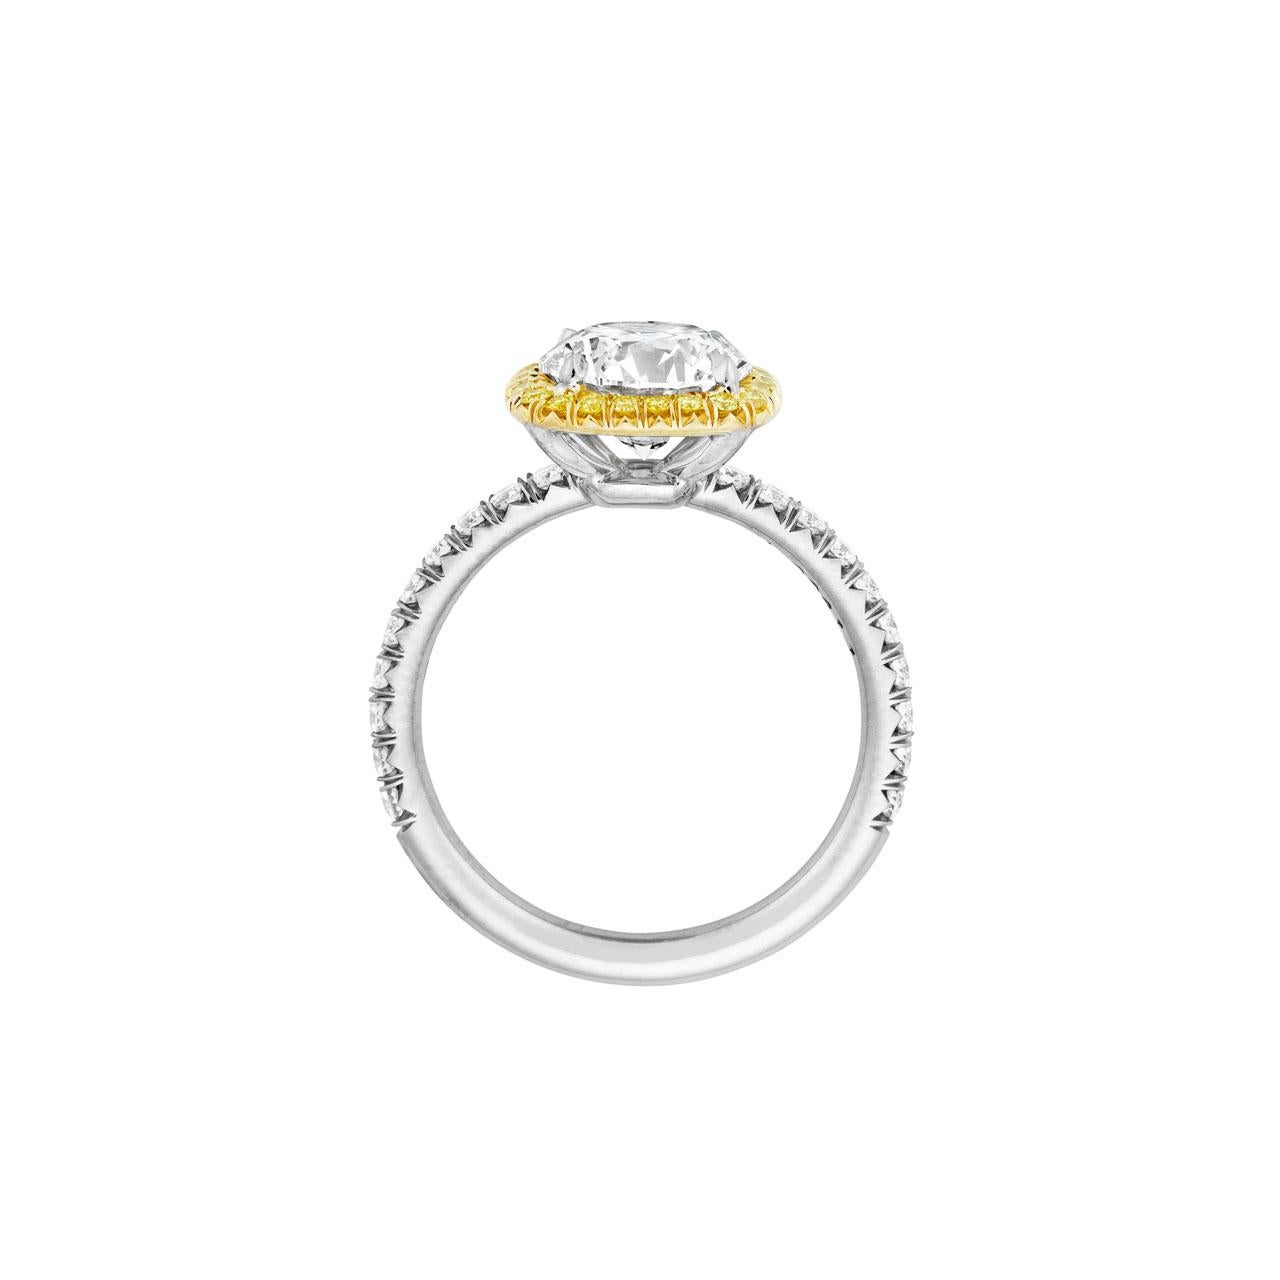 This beautiful 2.19 ct round GIA Certified stone is set in Platinum and 18kt and surrounded by .16 ct. total weight of Fancy Intent Yellow diamond melee along with .37 ct. total weight of FVS white diamond melee. It is currently a size 6.25 but can